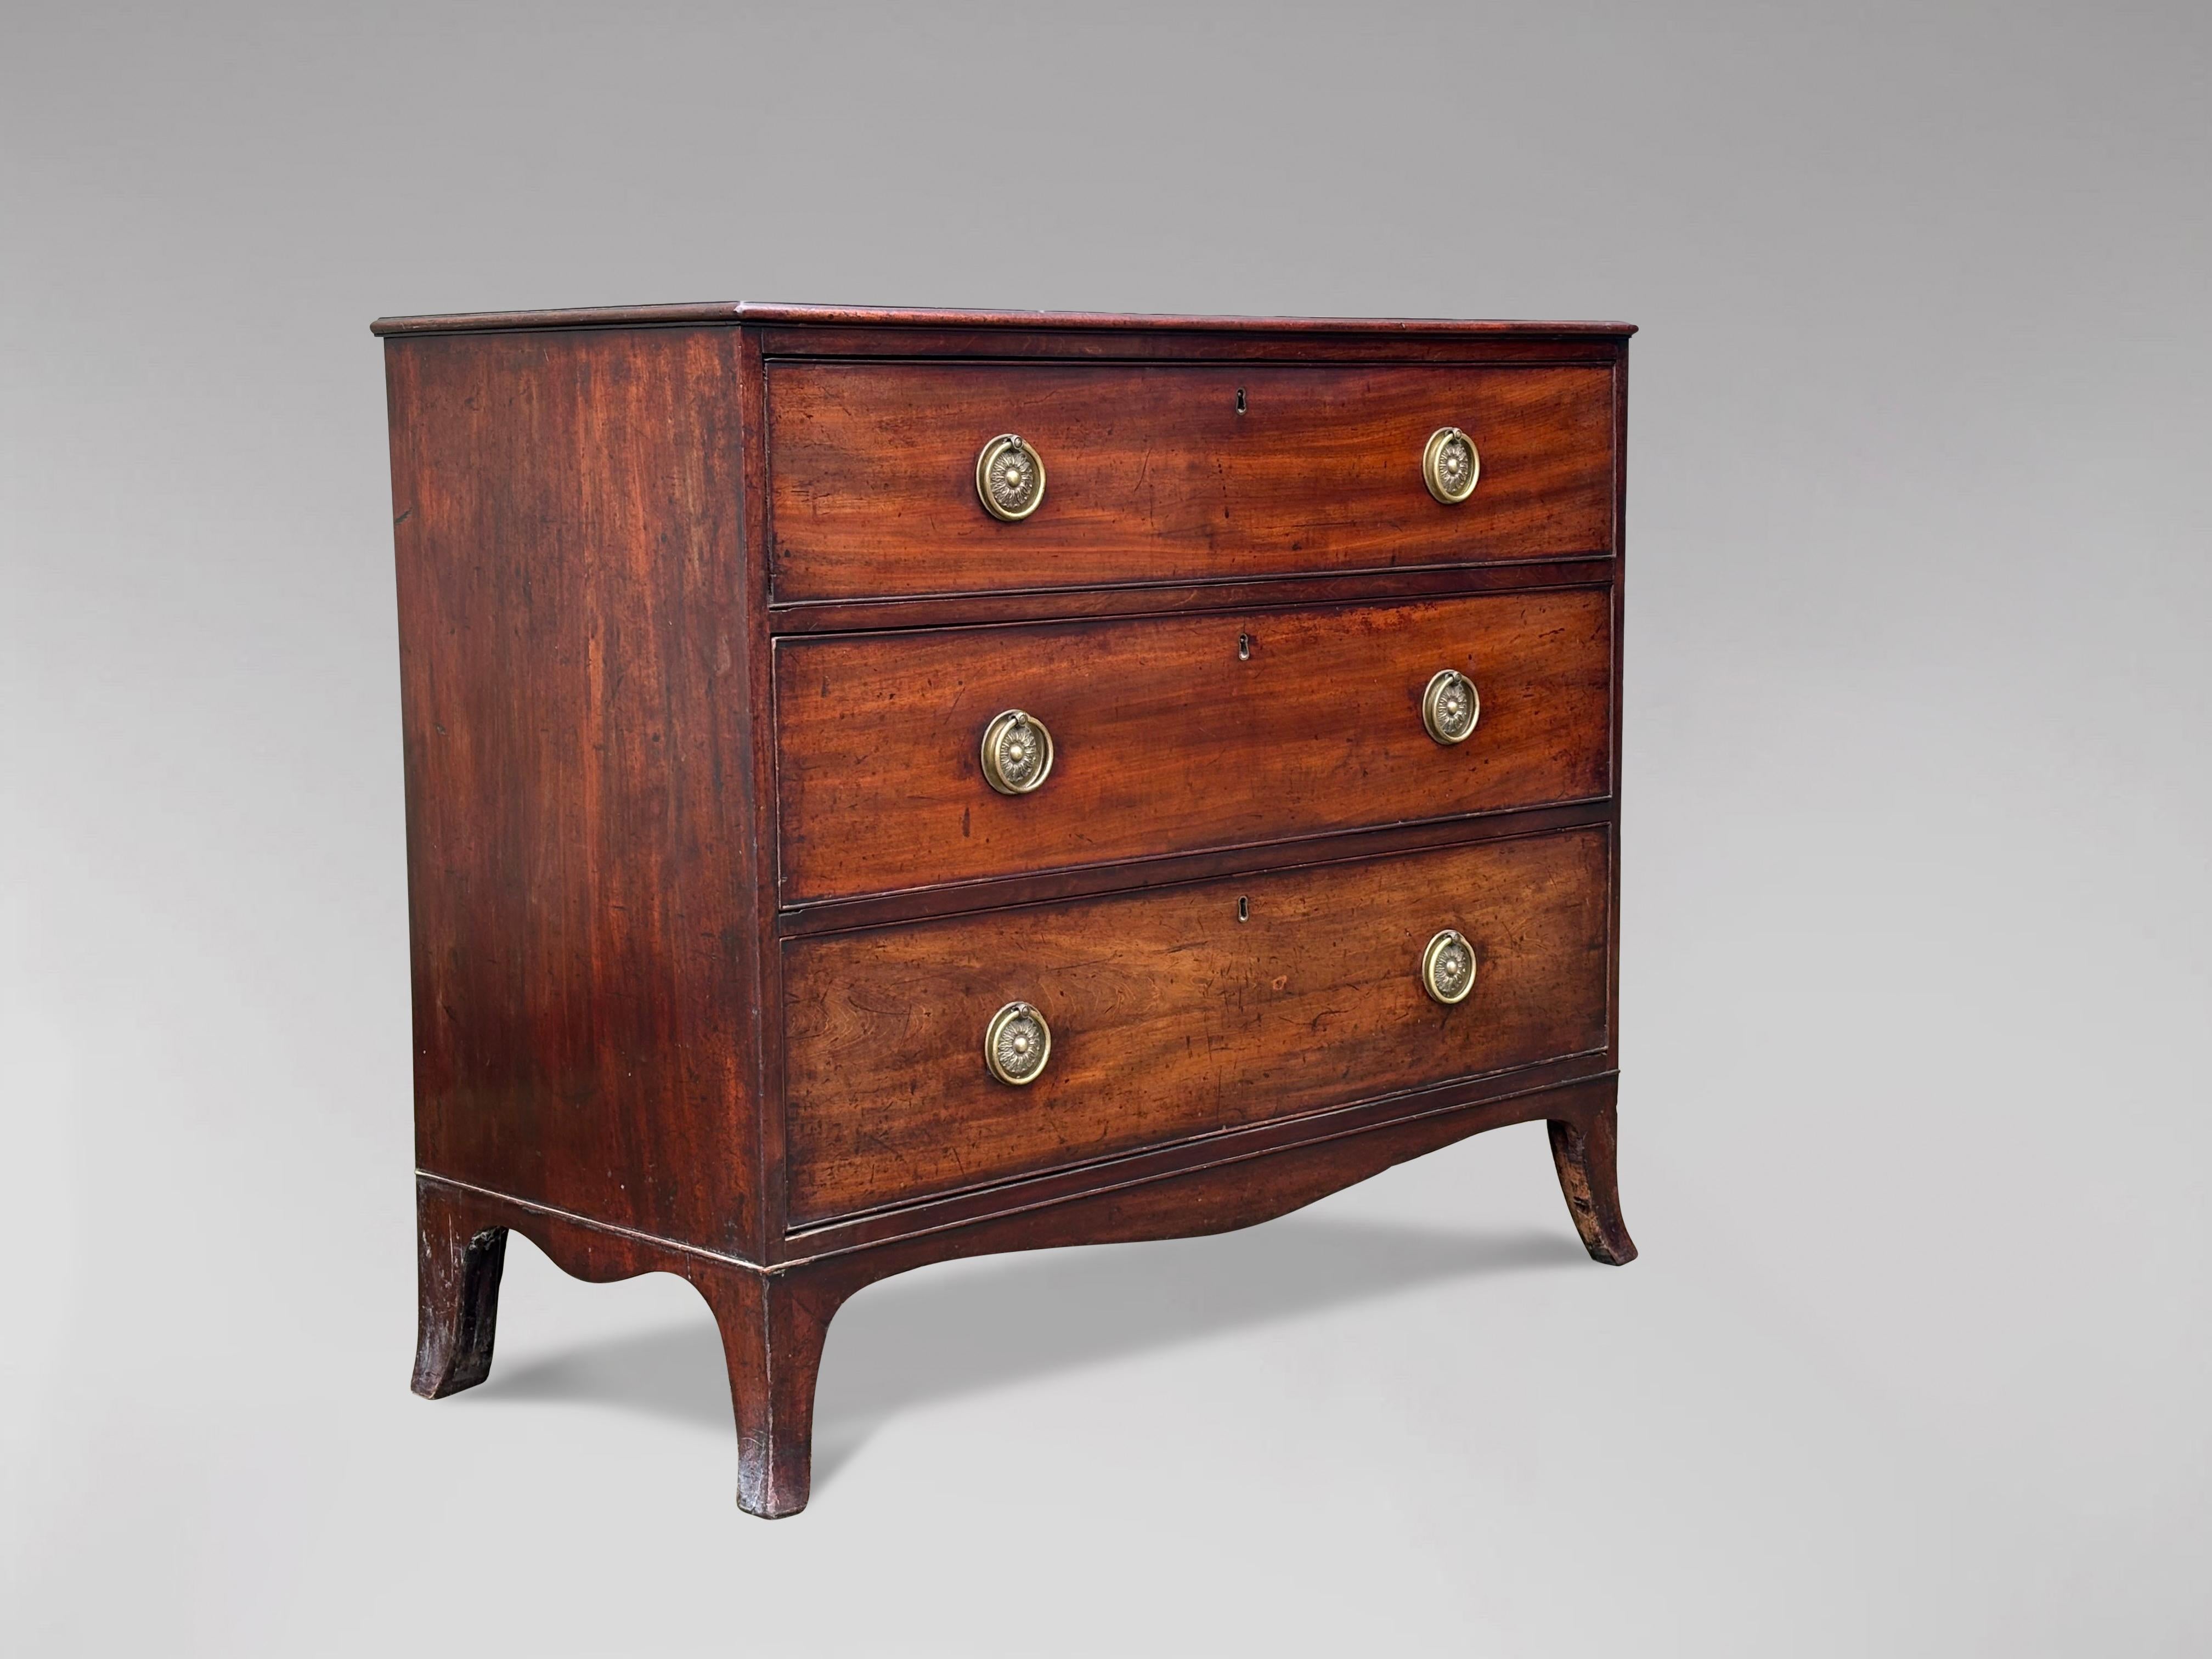 An attractive George III period, late 18th century mahogany chest of drawers. Rectangular moulded top above three long graduated drawers with the original brass ring handles. This chest is supported on bracket splayed feet. Superb original condition